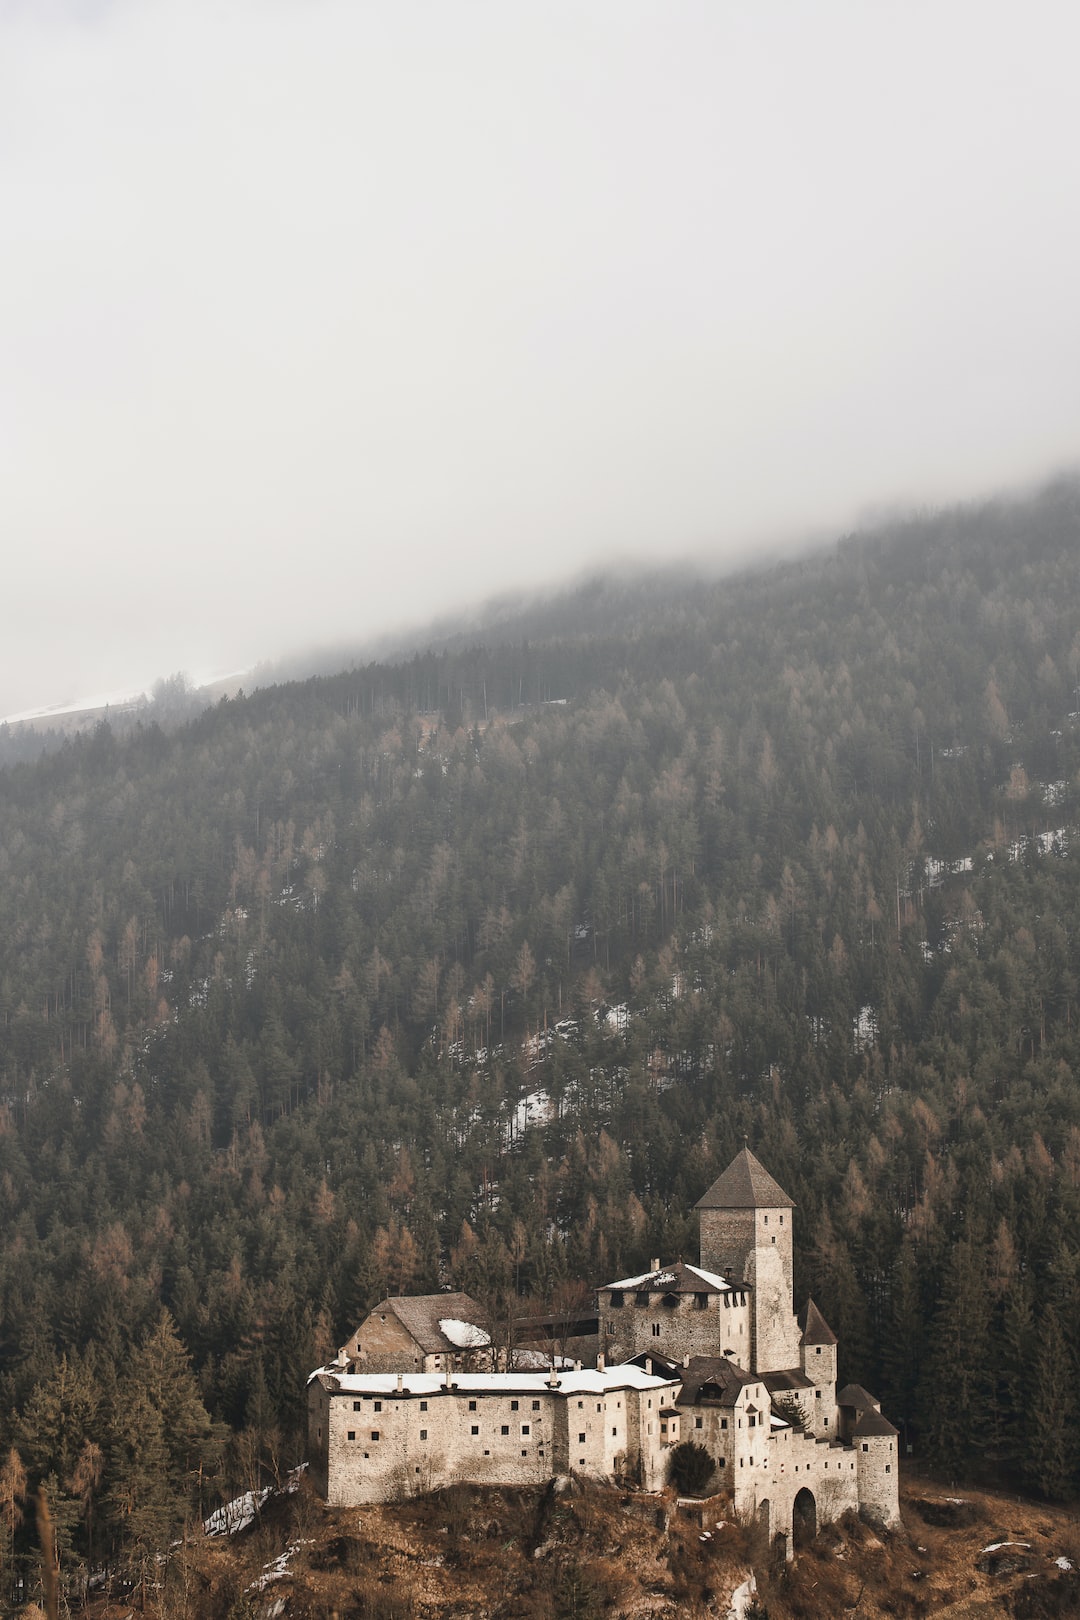 When the fog enthroned above the castle …